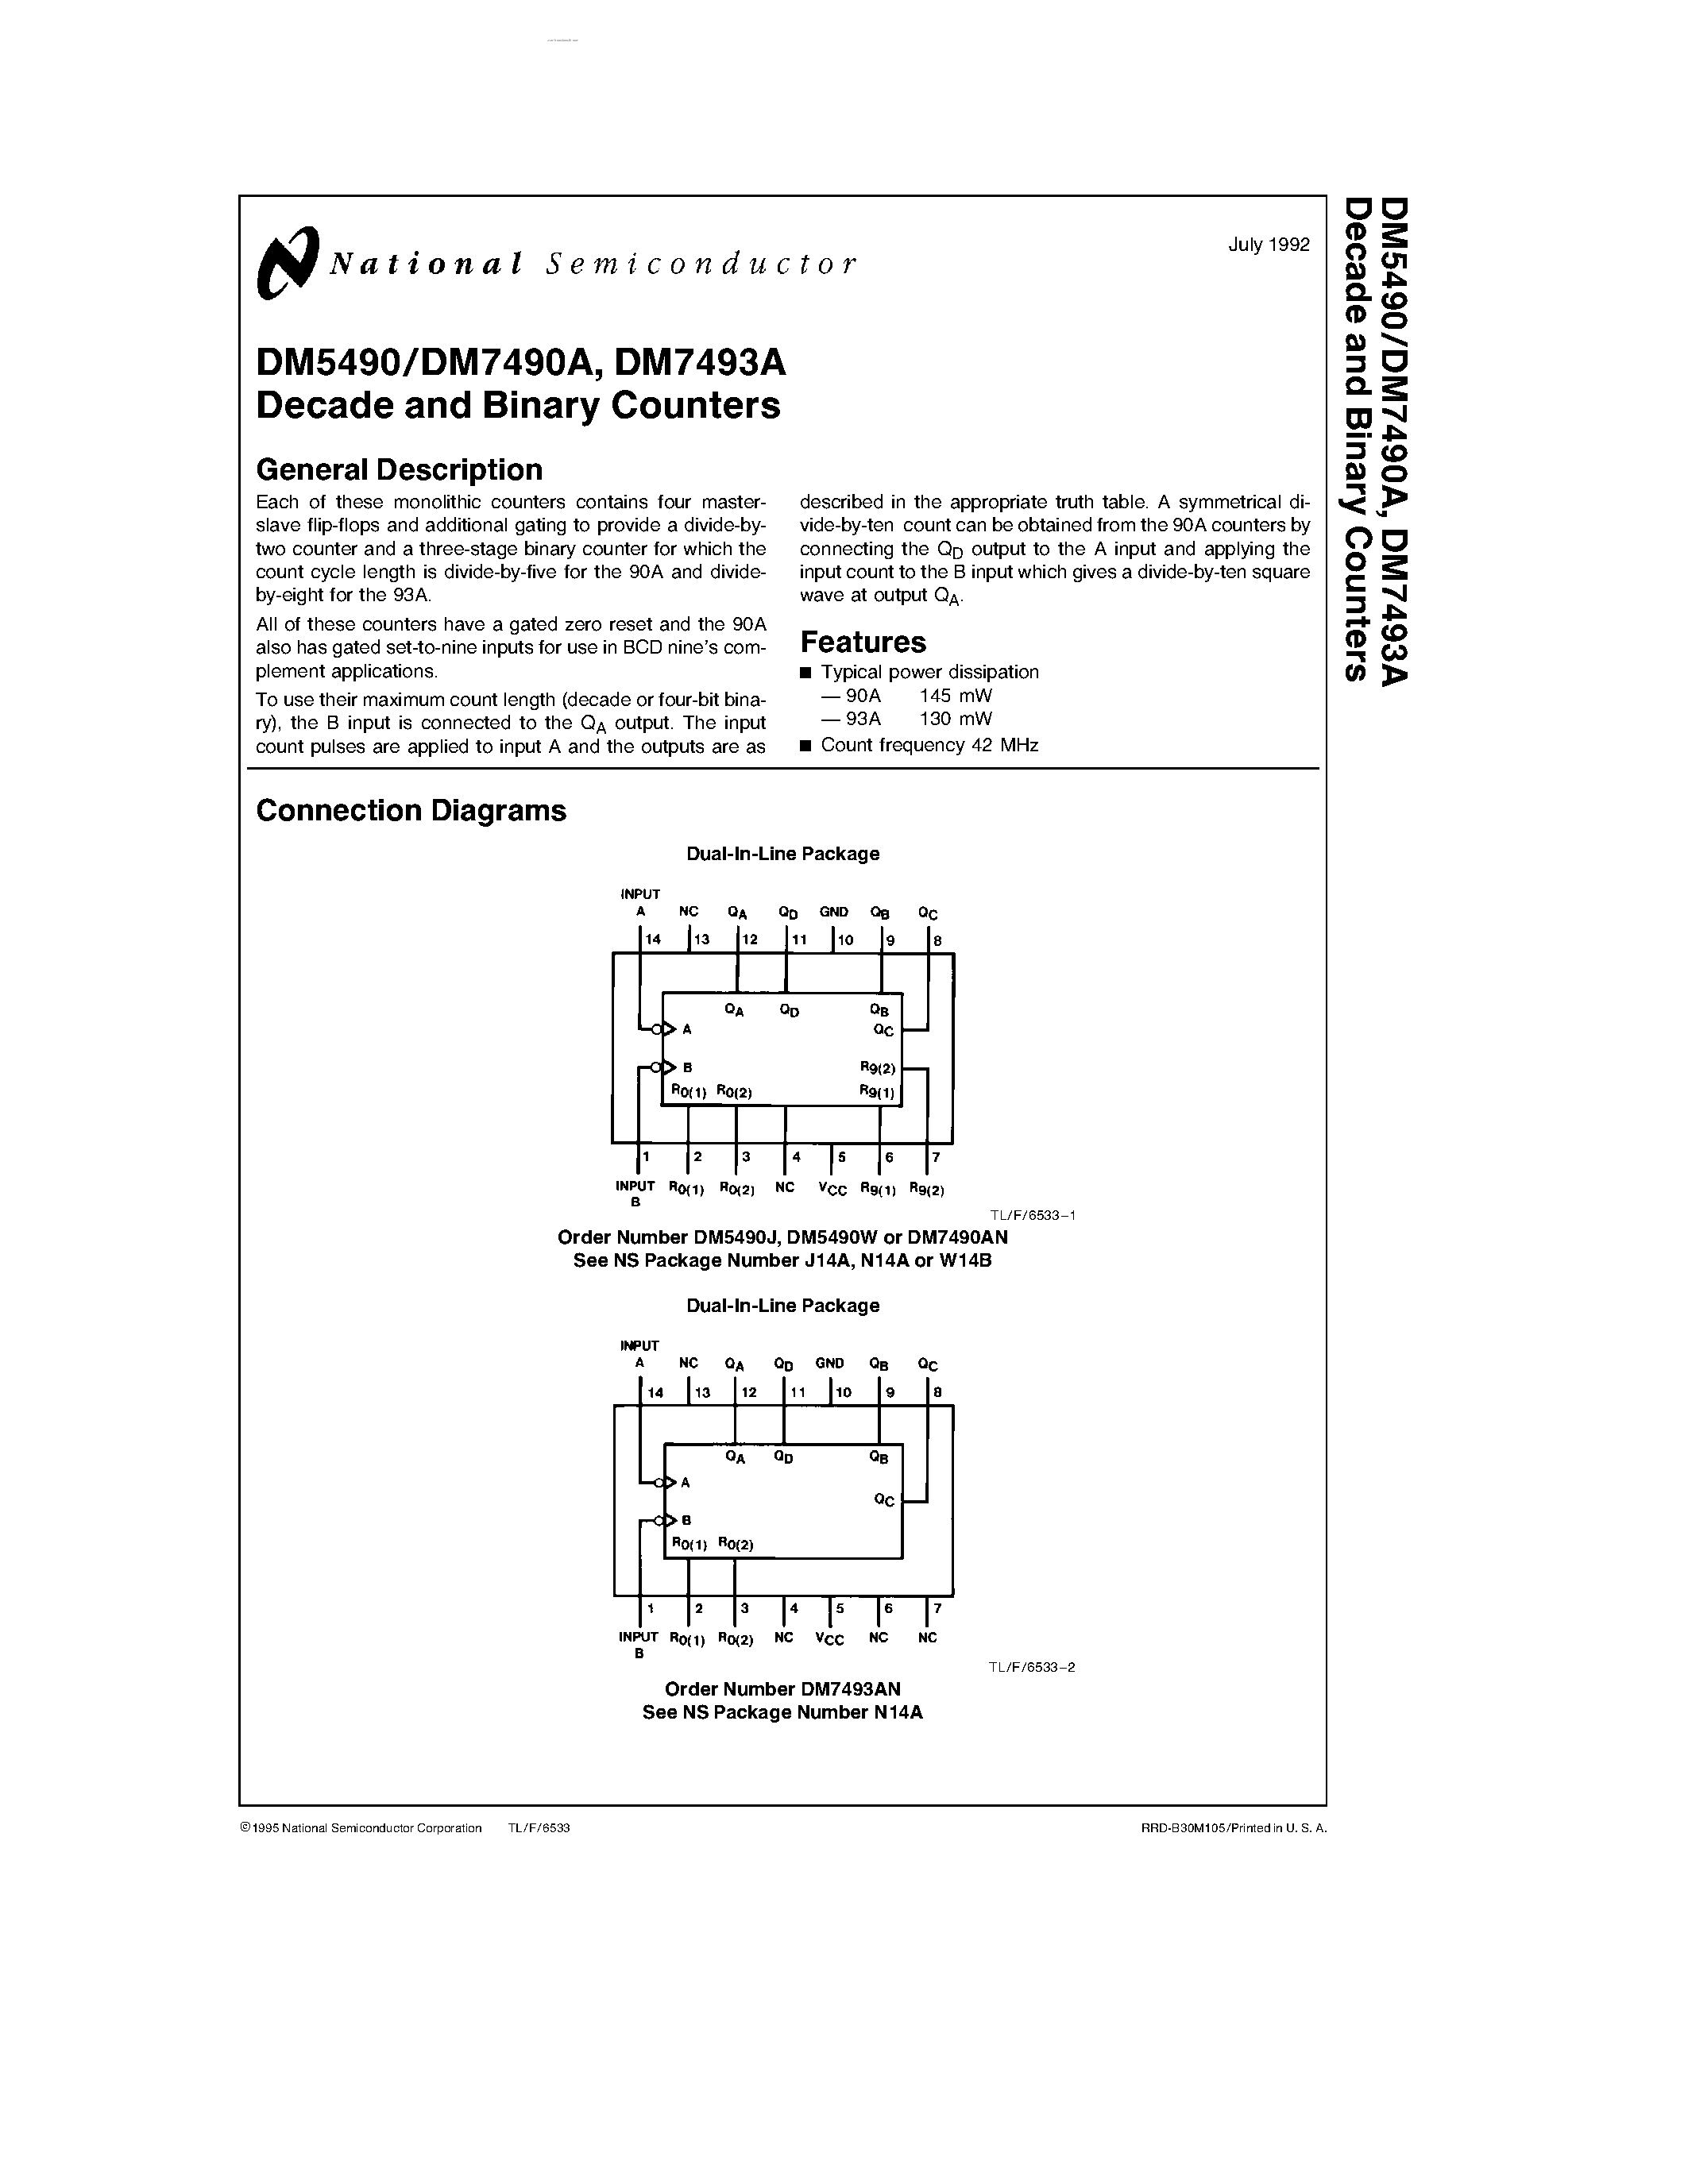 Datasheet 7493 - Decade and Binary Counters page 1